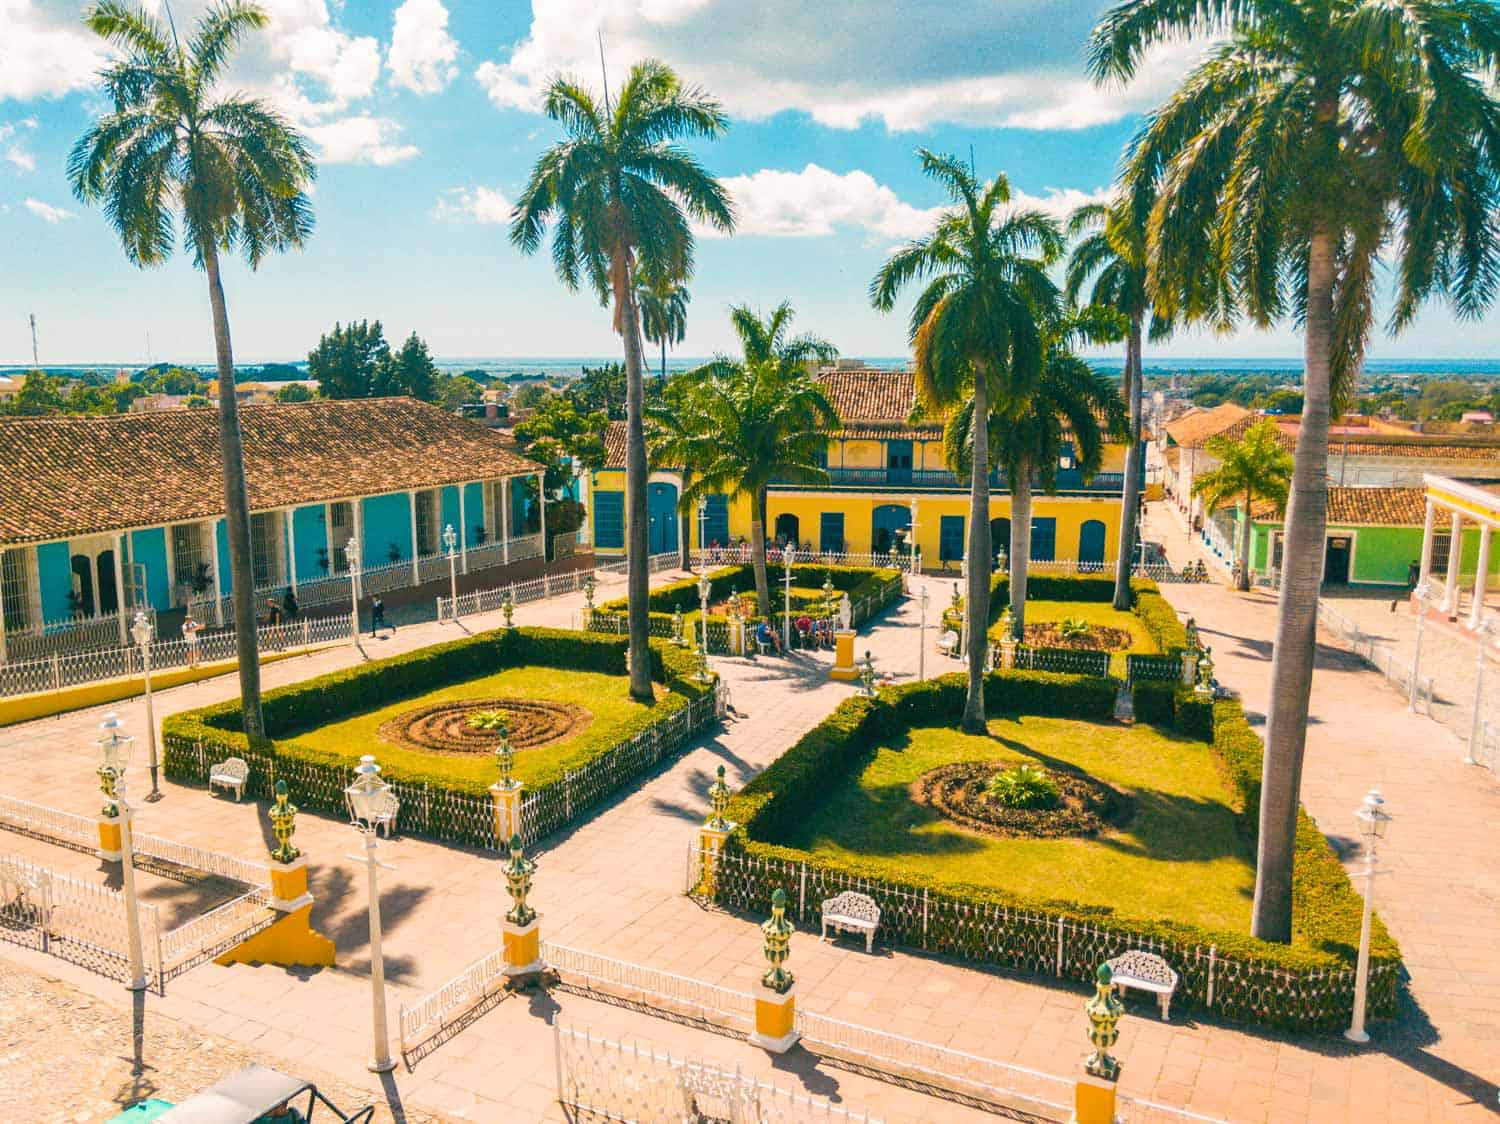 Playa Mayor in Trinidad Cuba is the center of all of the things to do in Trinidad.